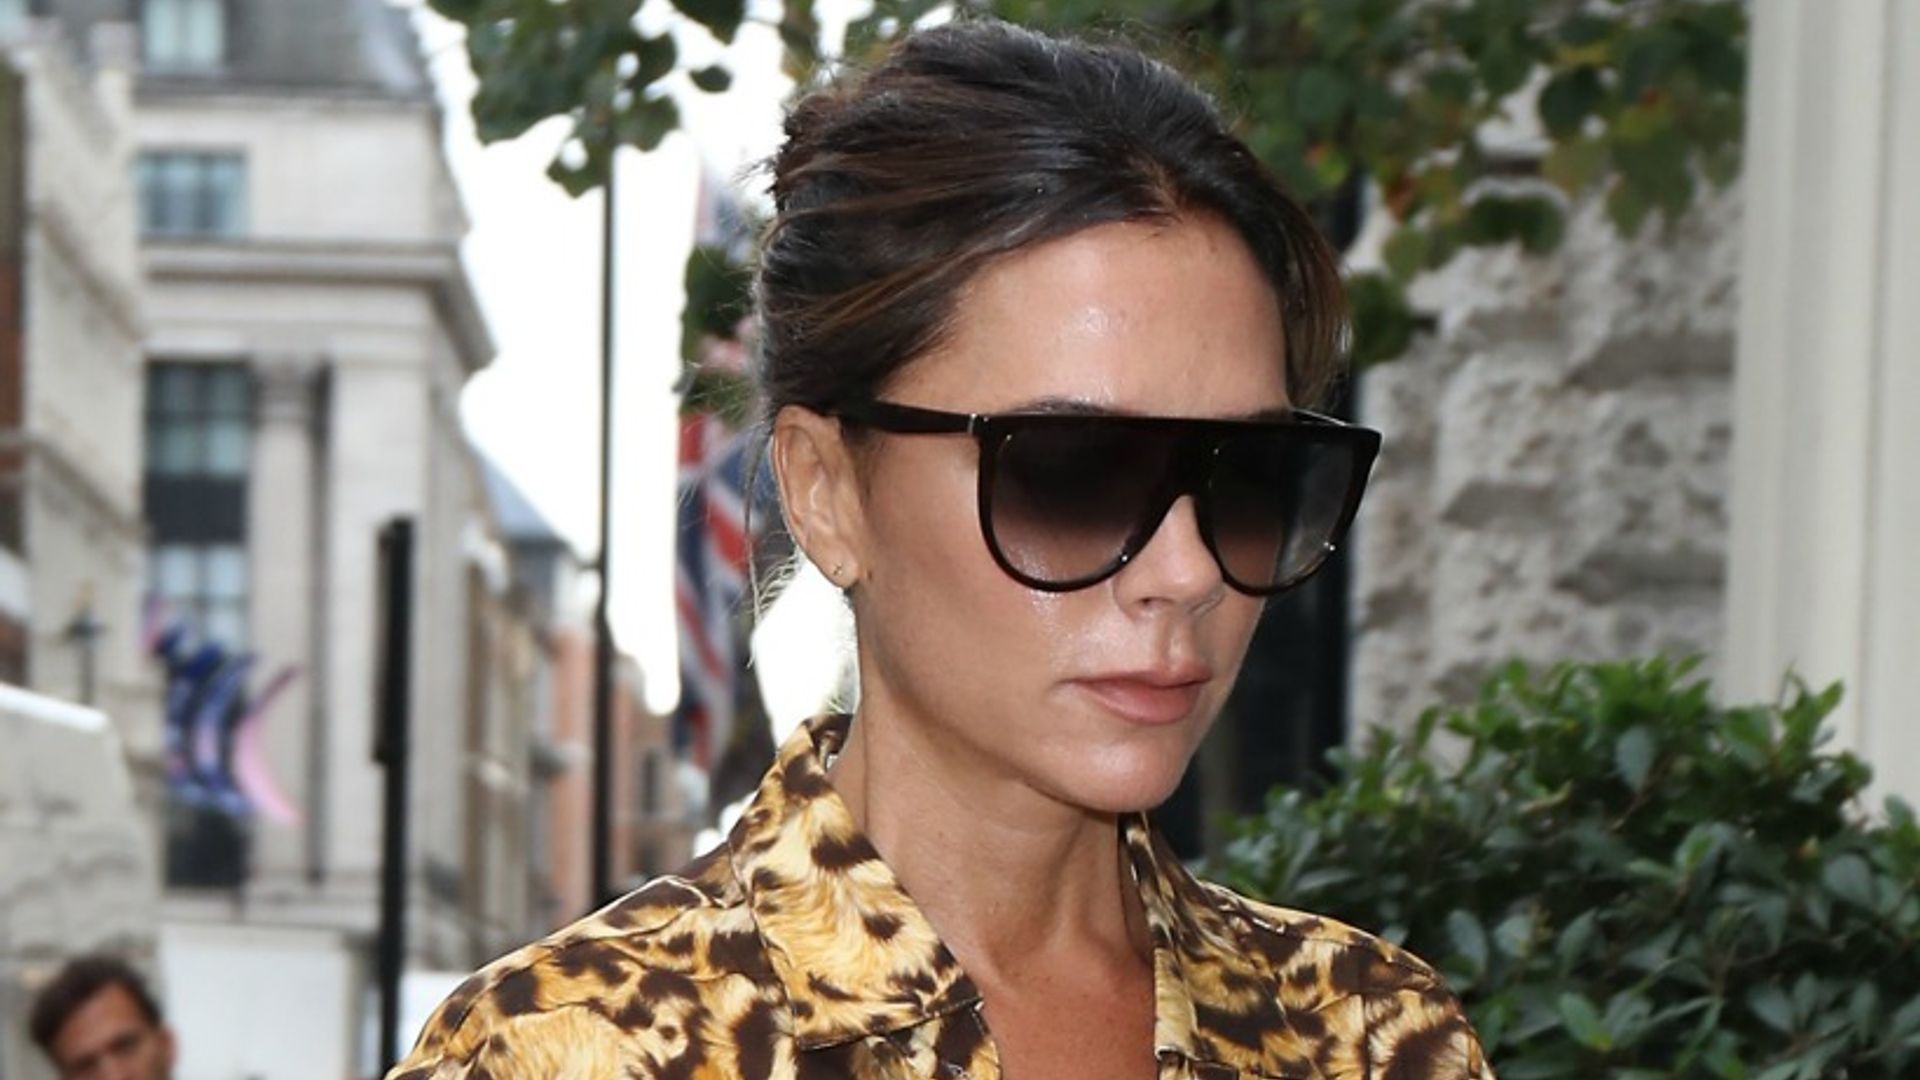 Victoria Beckham says she never regrets any of her style choices